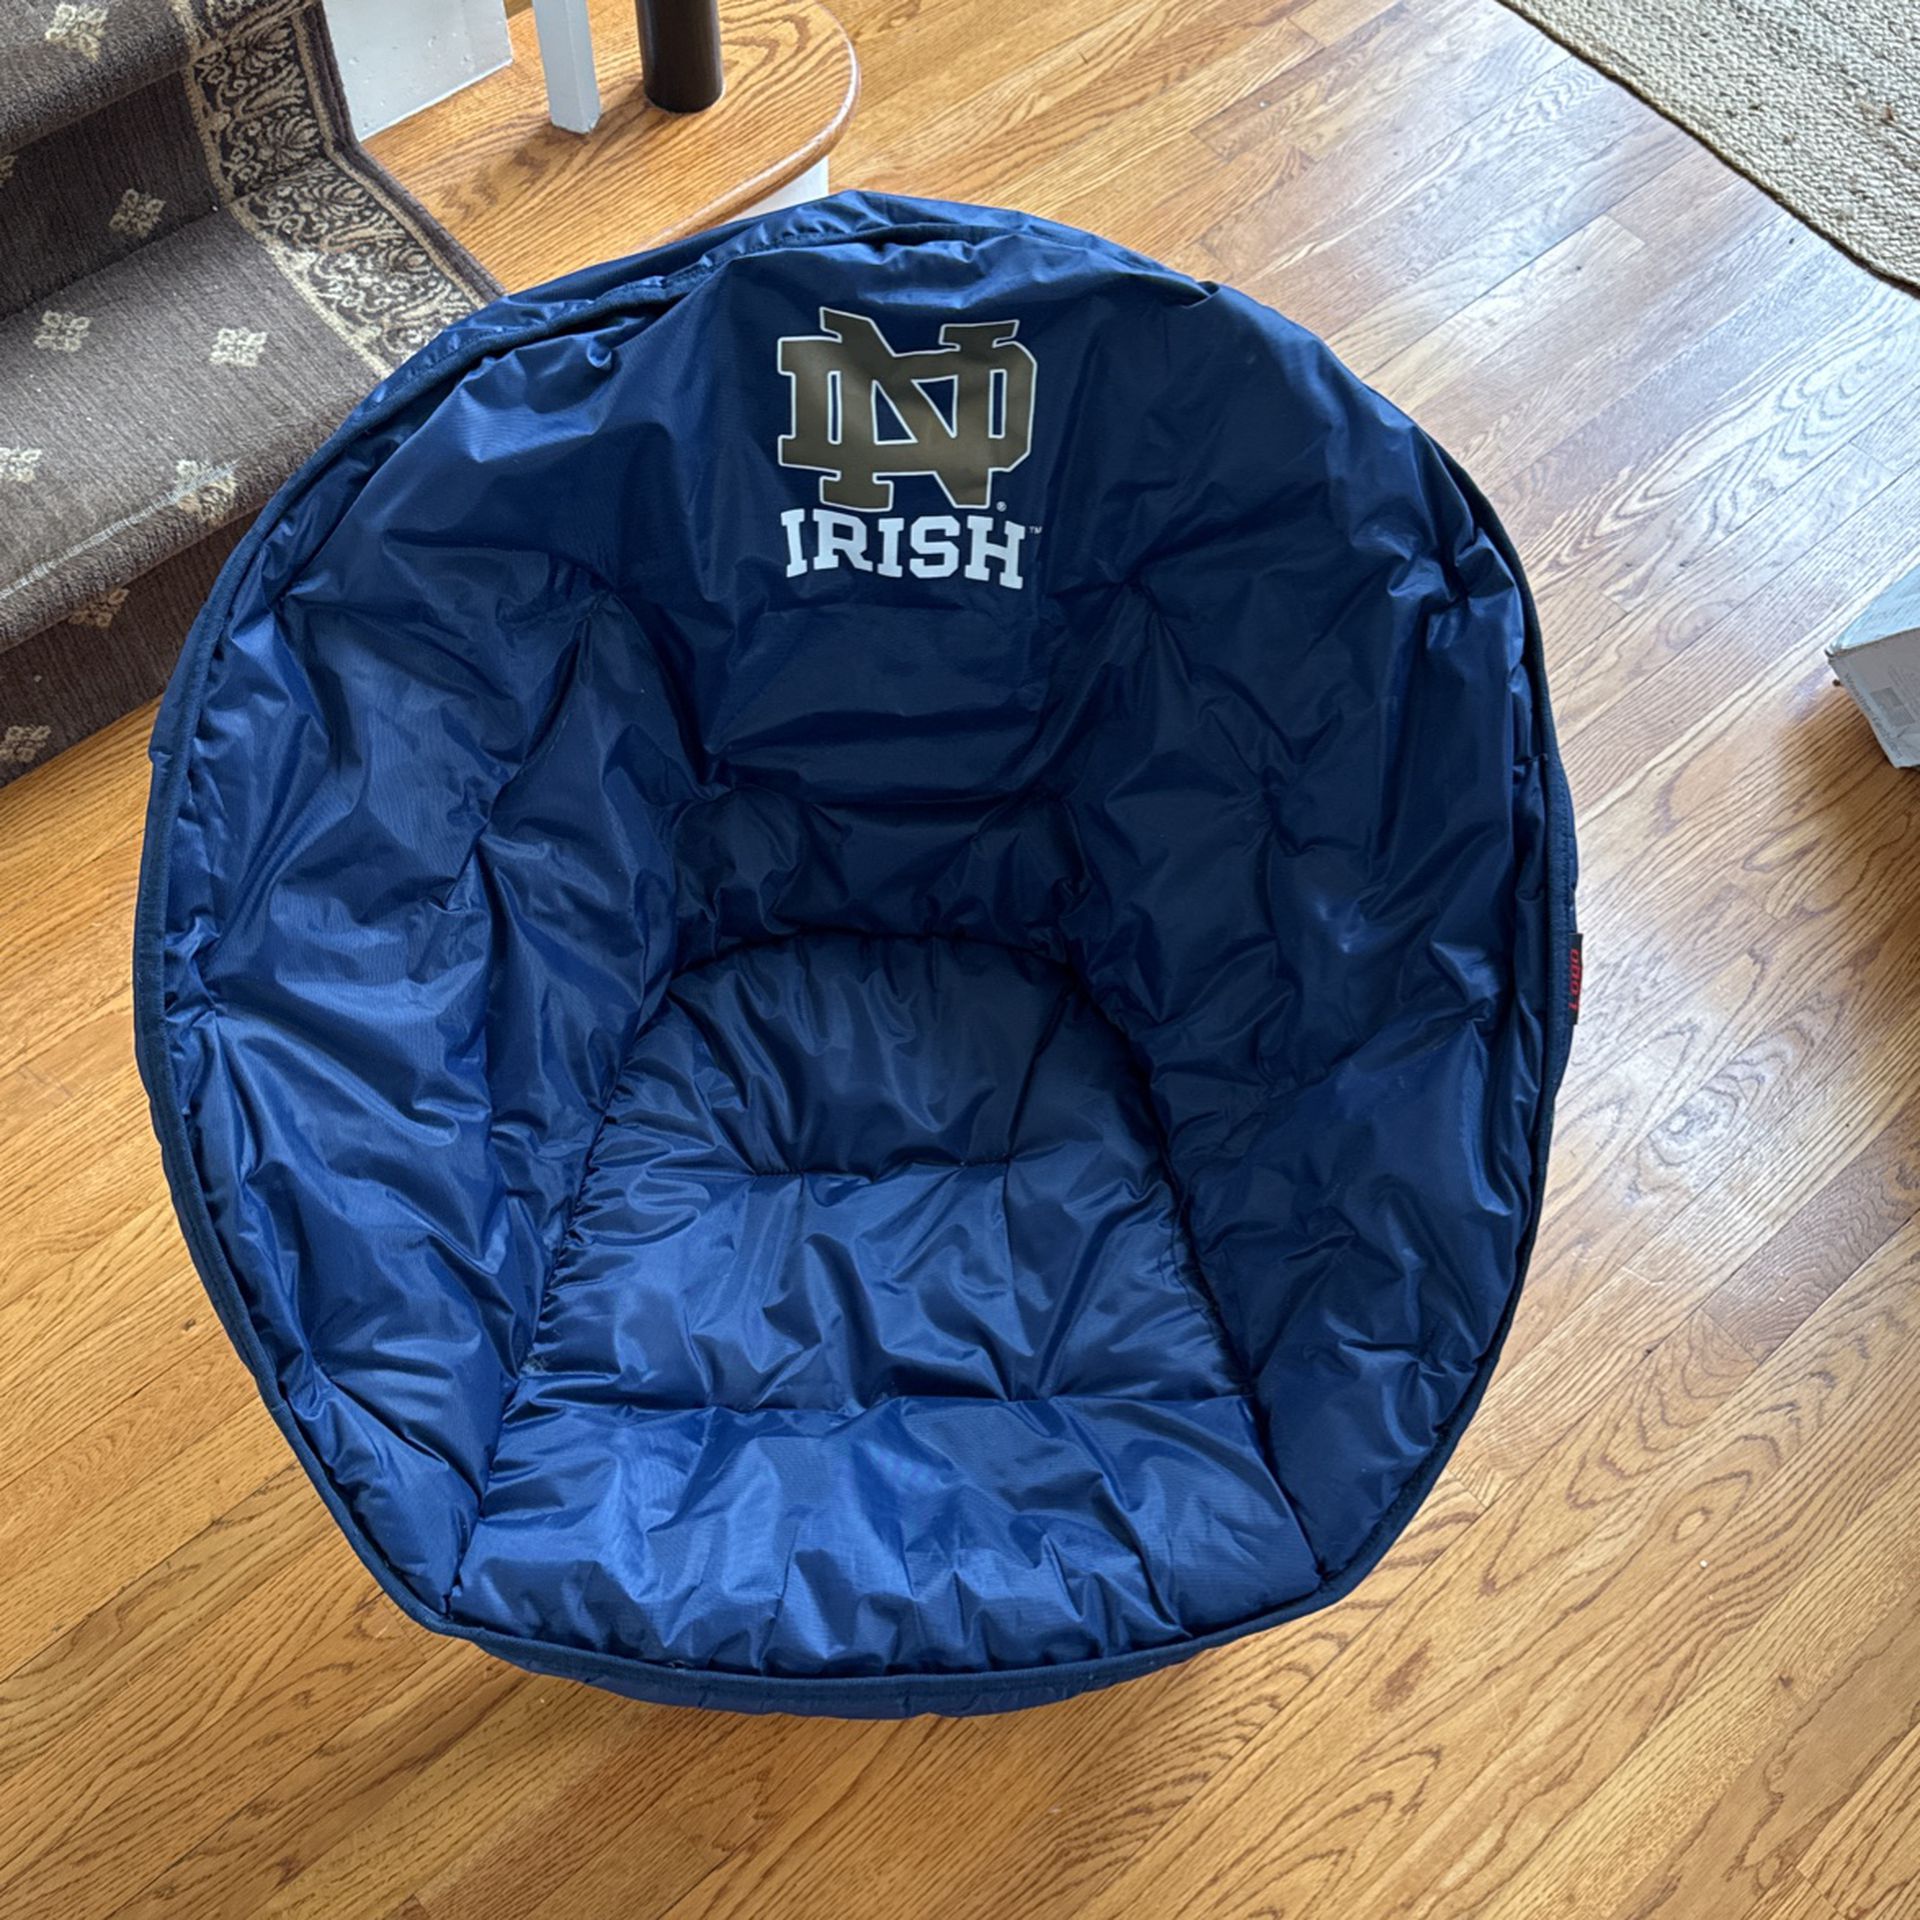 Notre Dame Chair